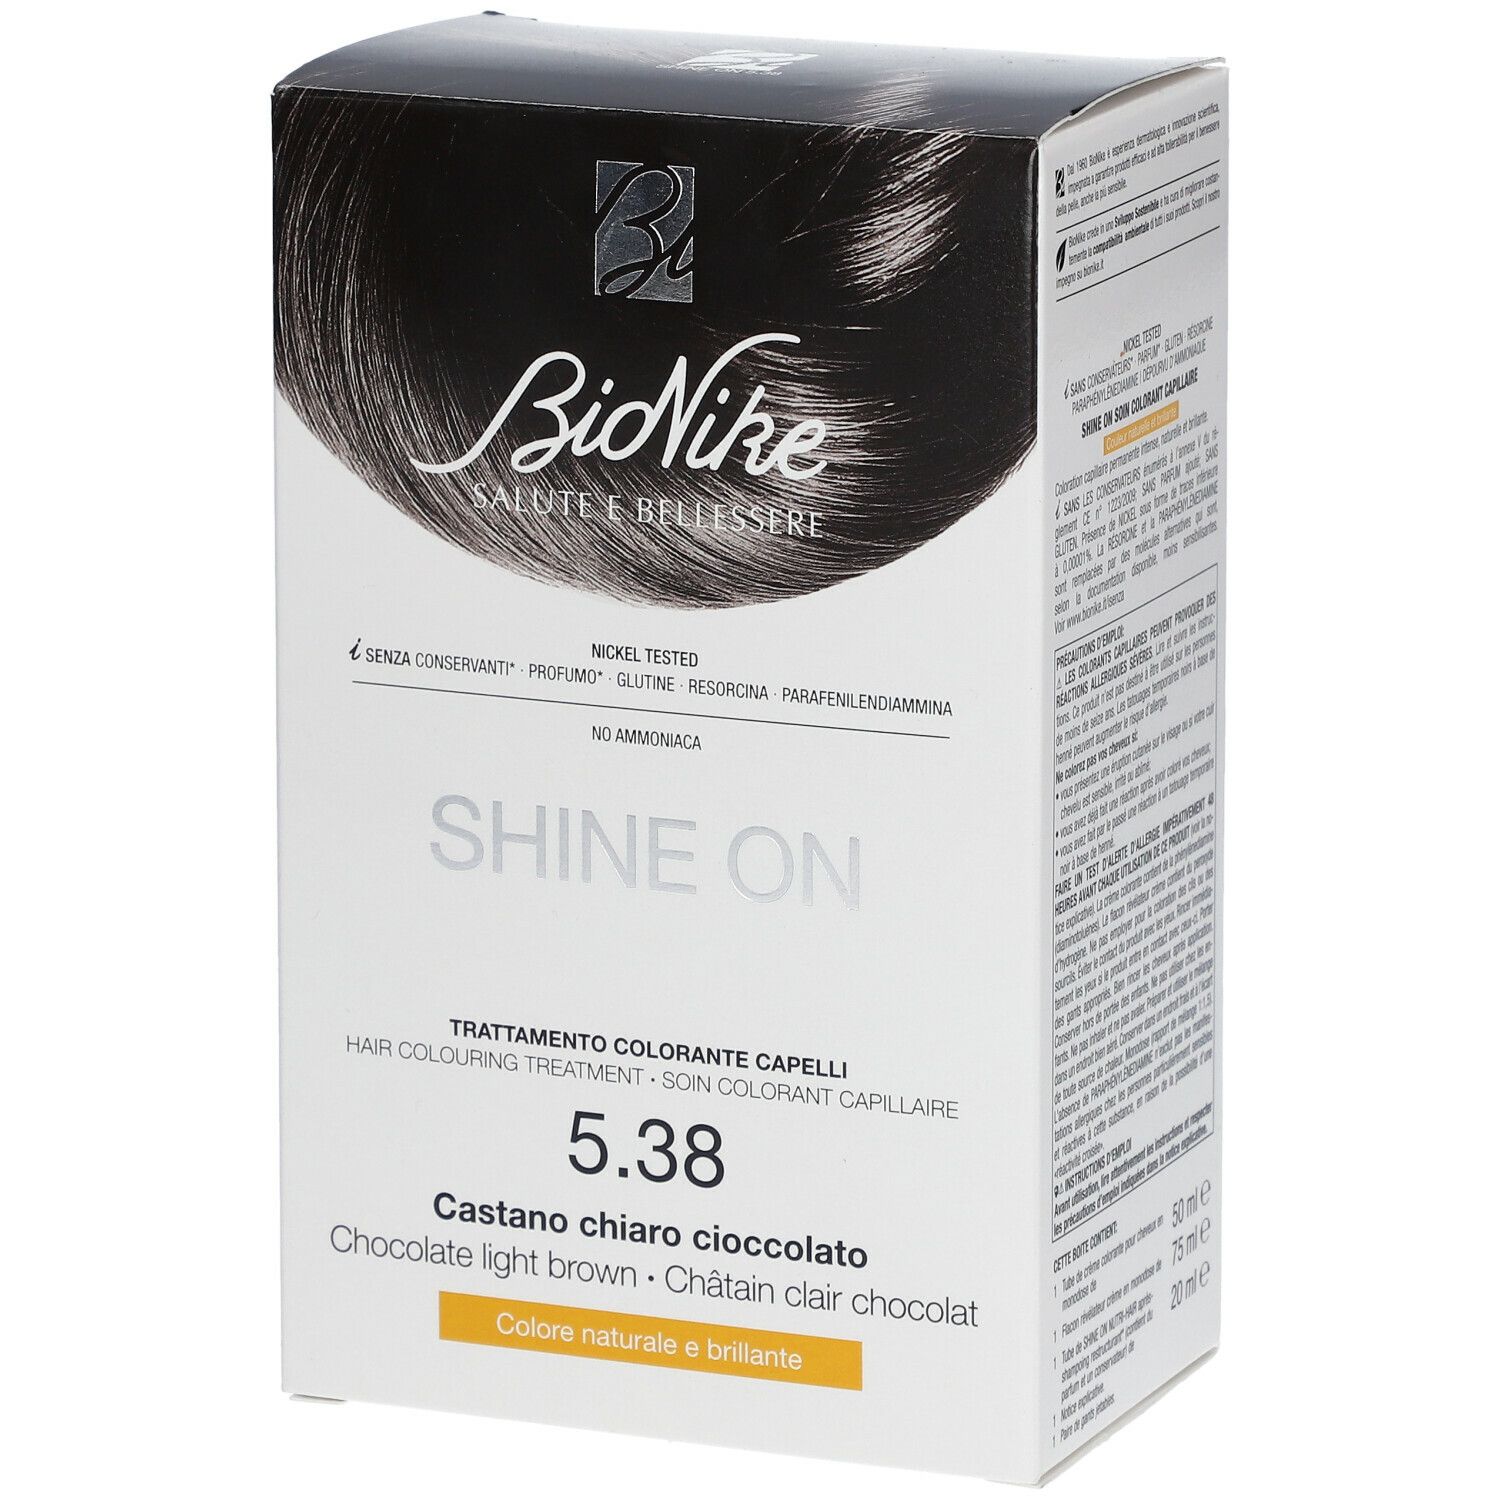 BioNike Shine ON Soin colorant capillaire 5.38 Châtain Clair Chocolat